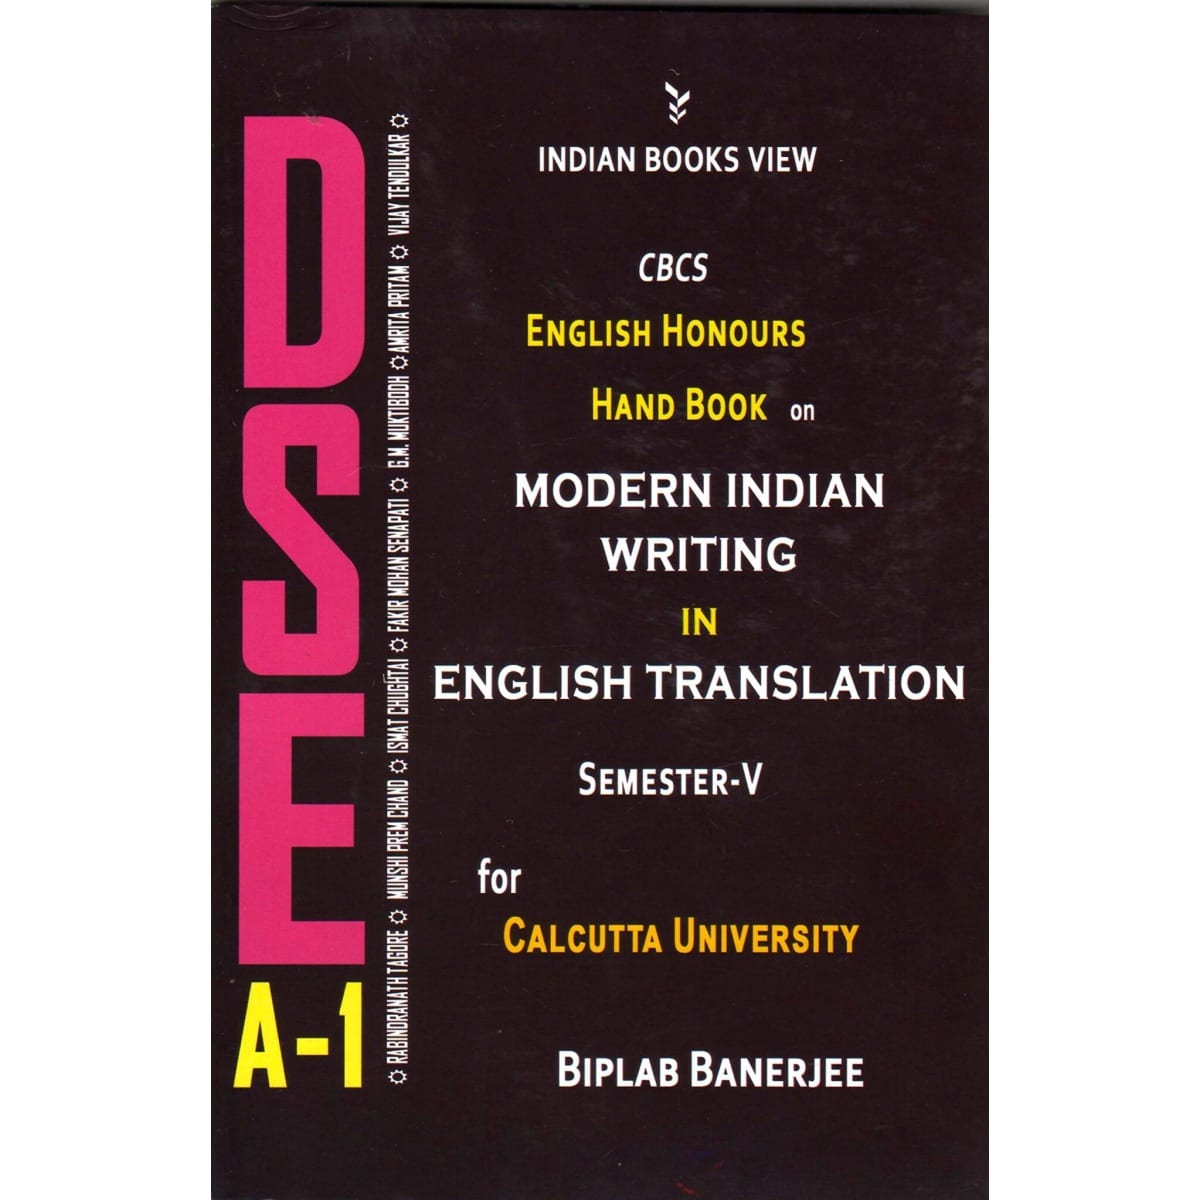 DSE A-1 CBCS English Honours Hand Book on Modern Indian Writing in English Translation Semester-V for Calcutta University Paperback – 1 January 2020 by Biplab Banerjee (Author) dse